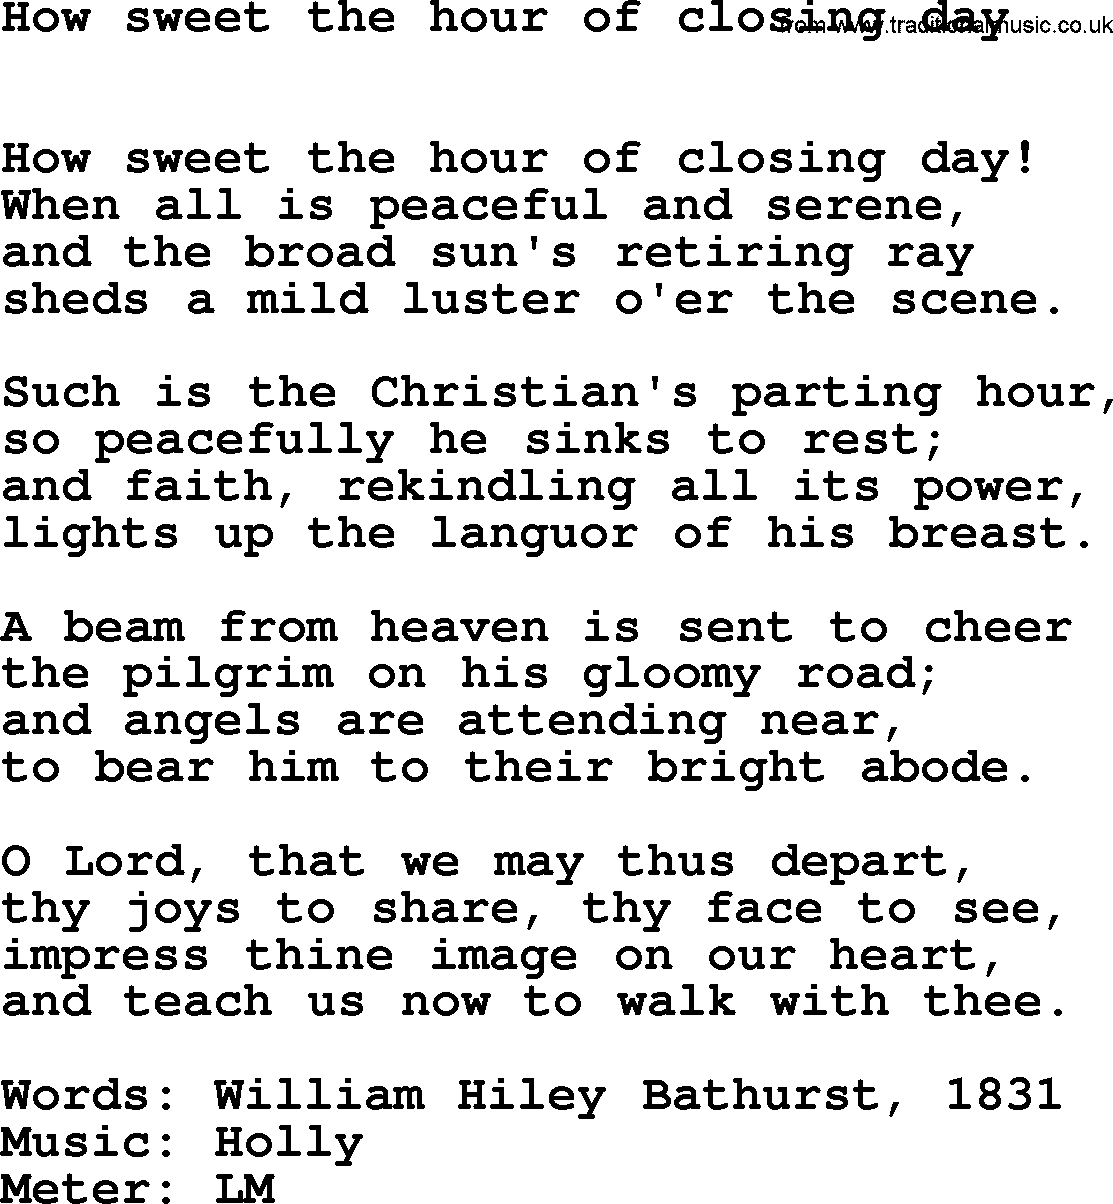 Book of Common Praise Hymn: How Sweet The Hour Of Closing Day.txt lyrics with midi music